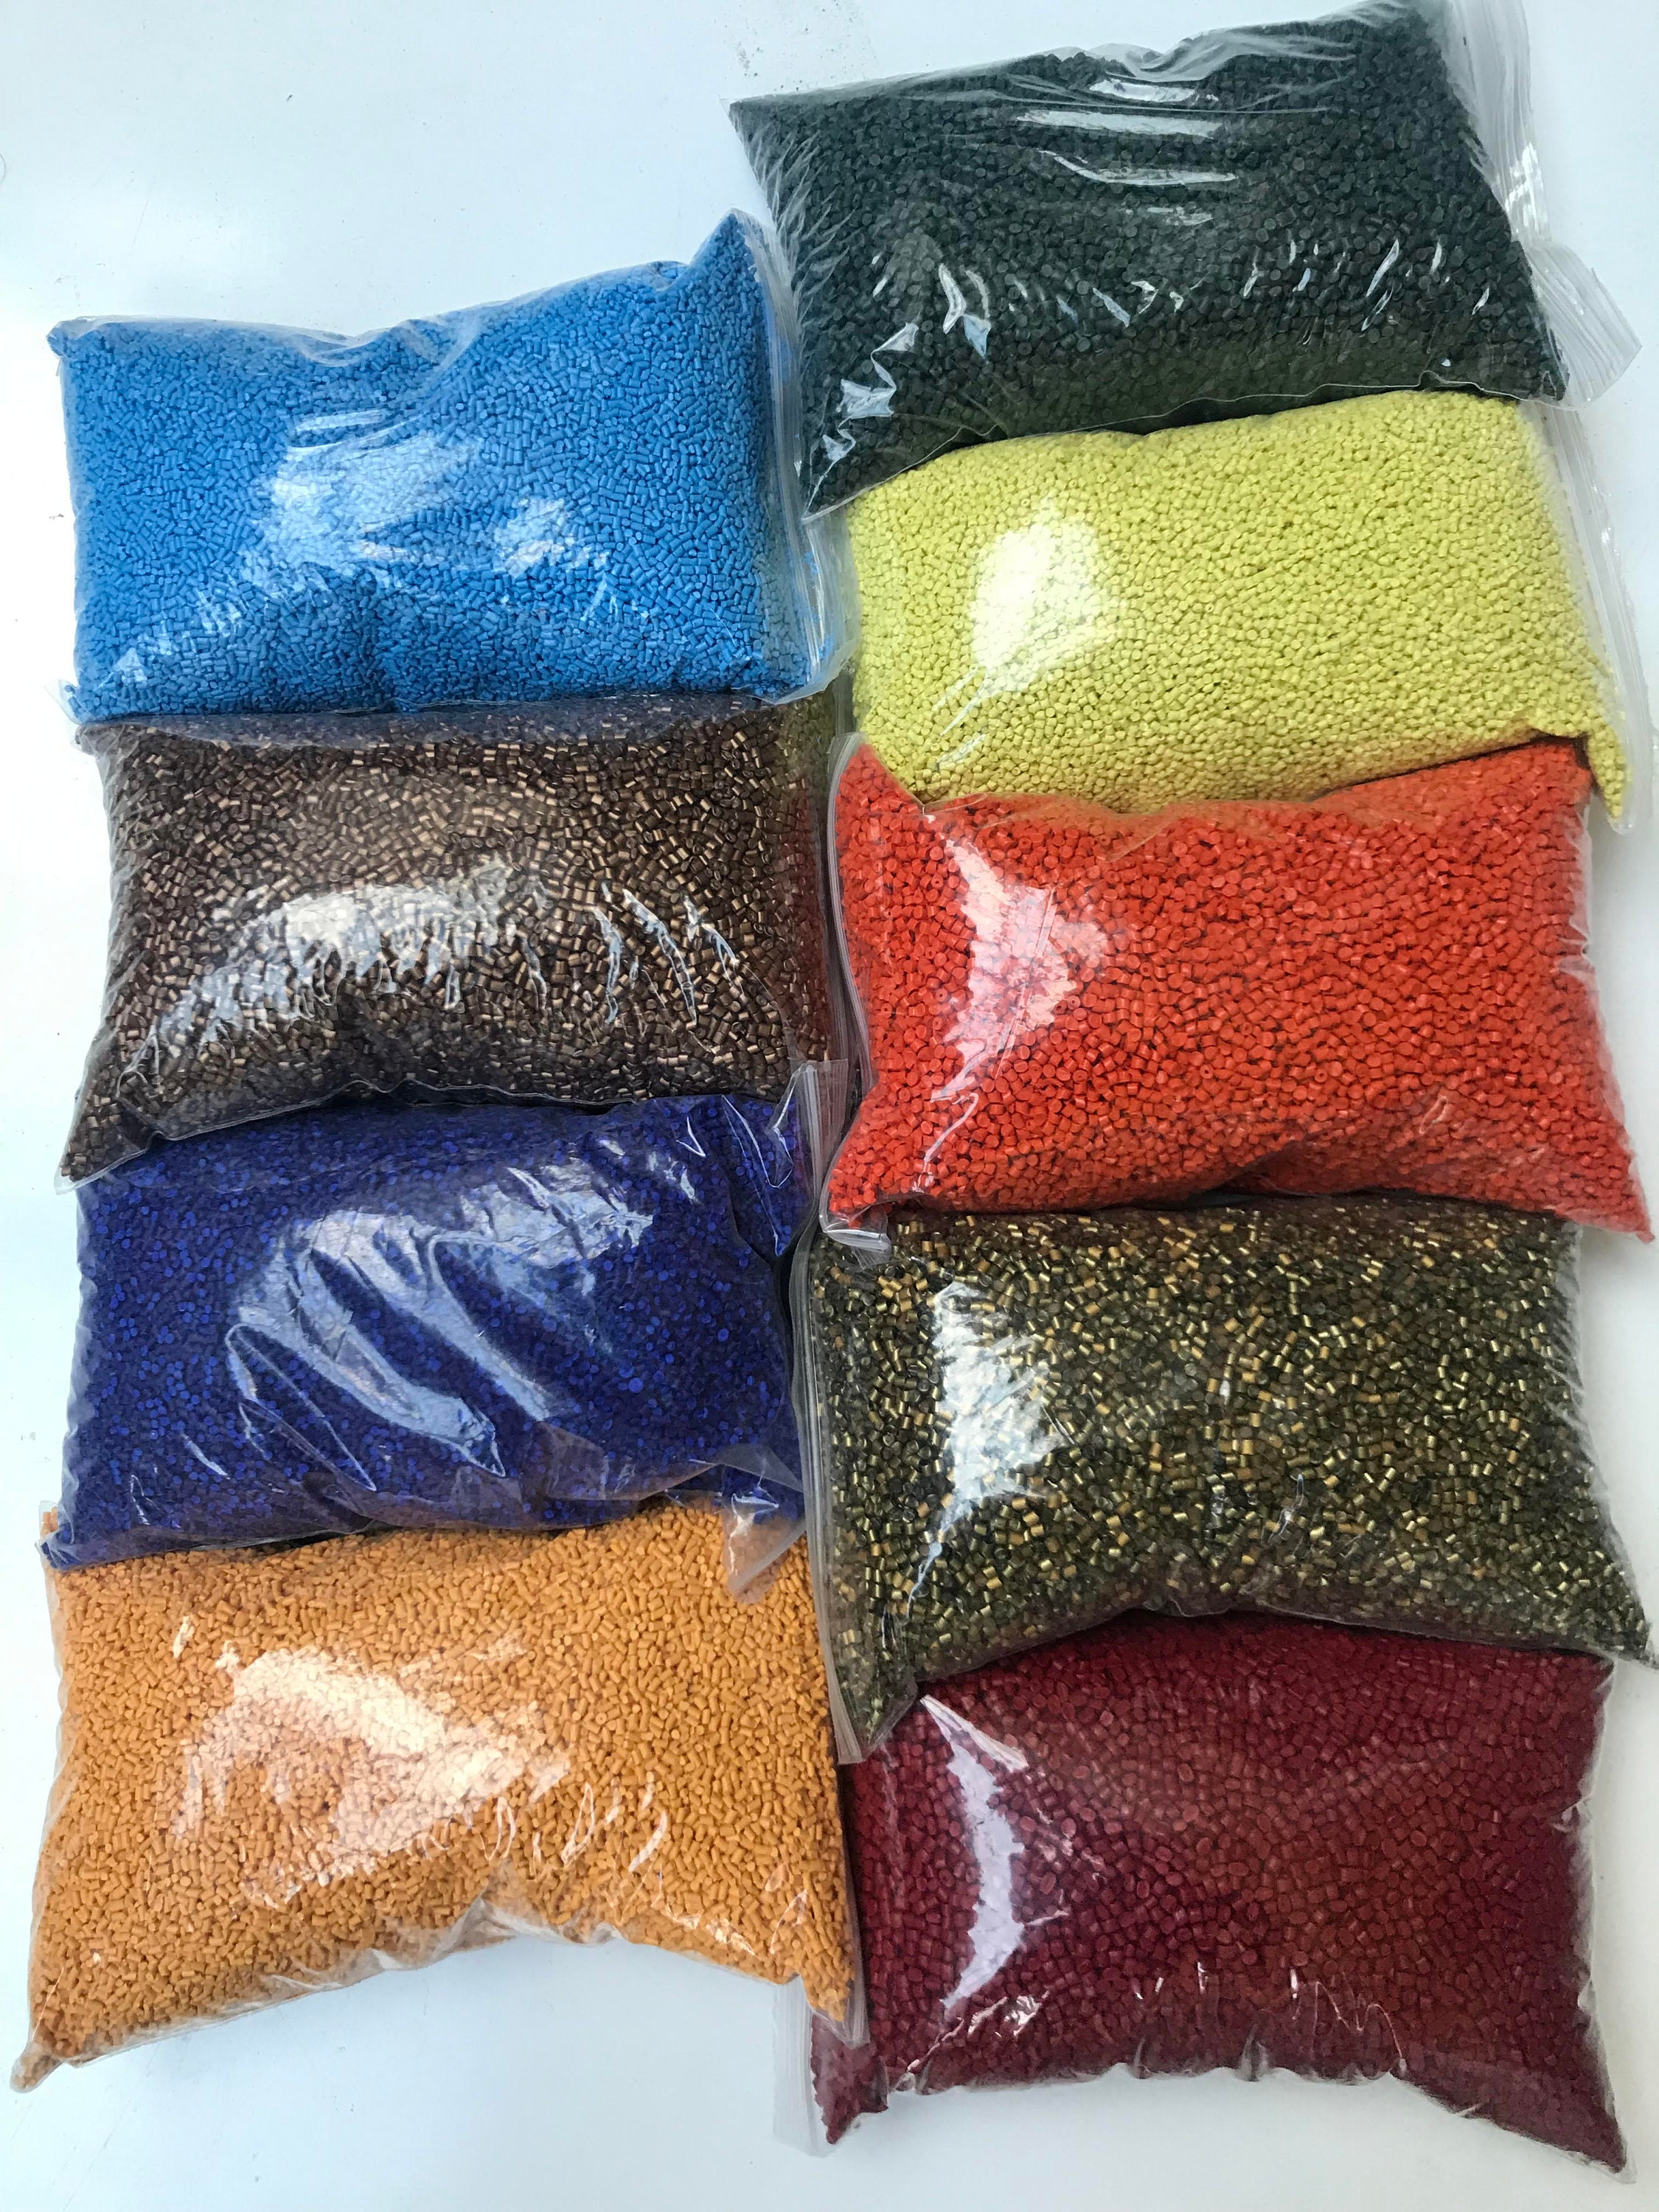  Poly Plastic Pellets Bulk for Weighted Blankets & Crafts Bulk  Box (25 pounds) Made in the USA for Rock Tumbling, Stuffing & Filling  Dolls, Crafts, Lap Pad : Arts, Crafts 